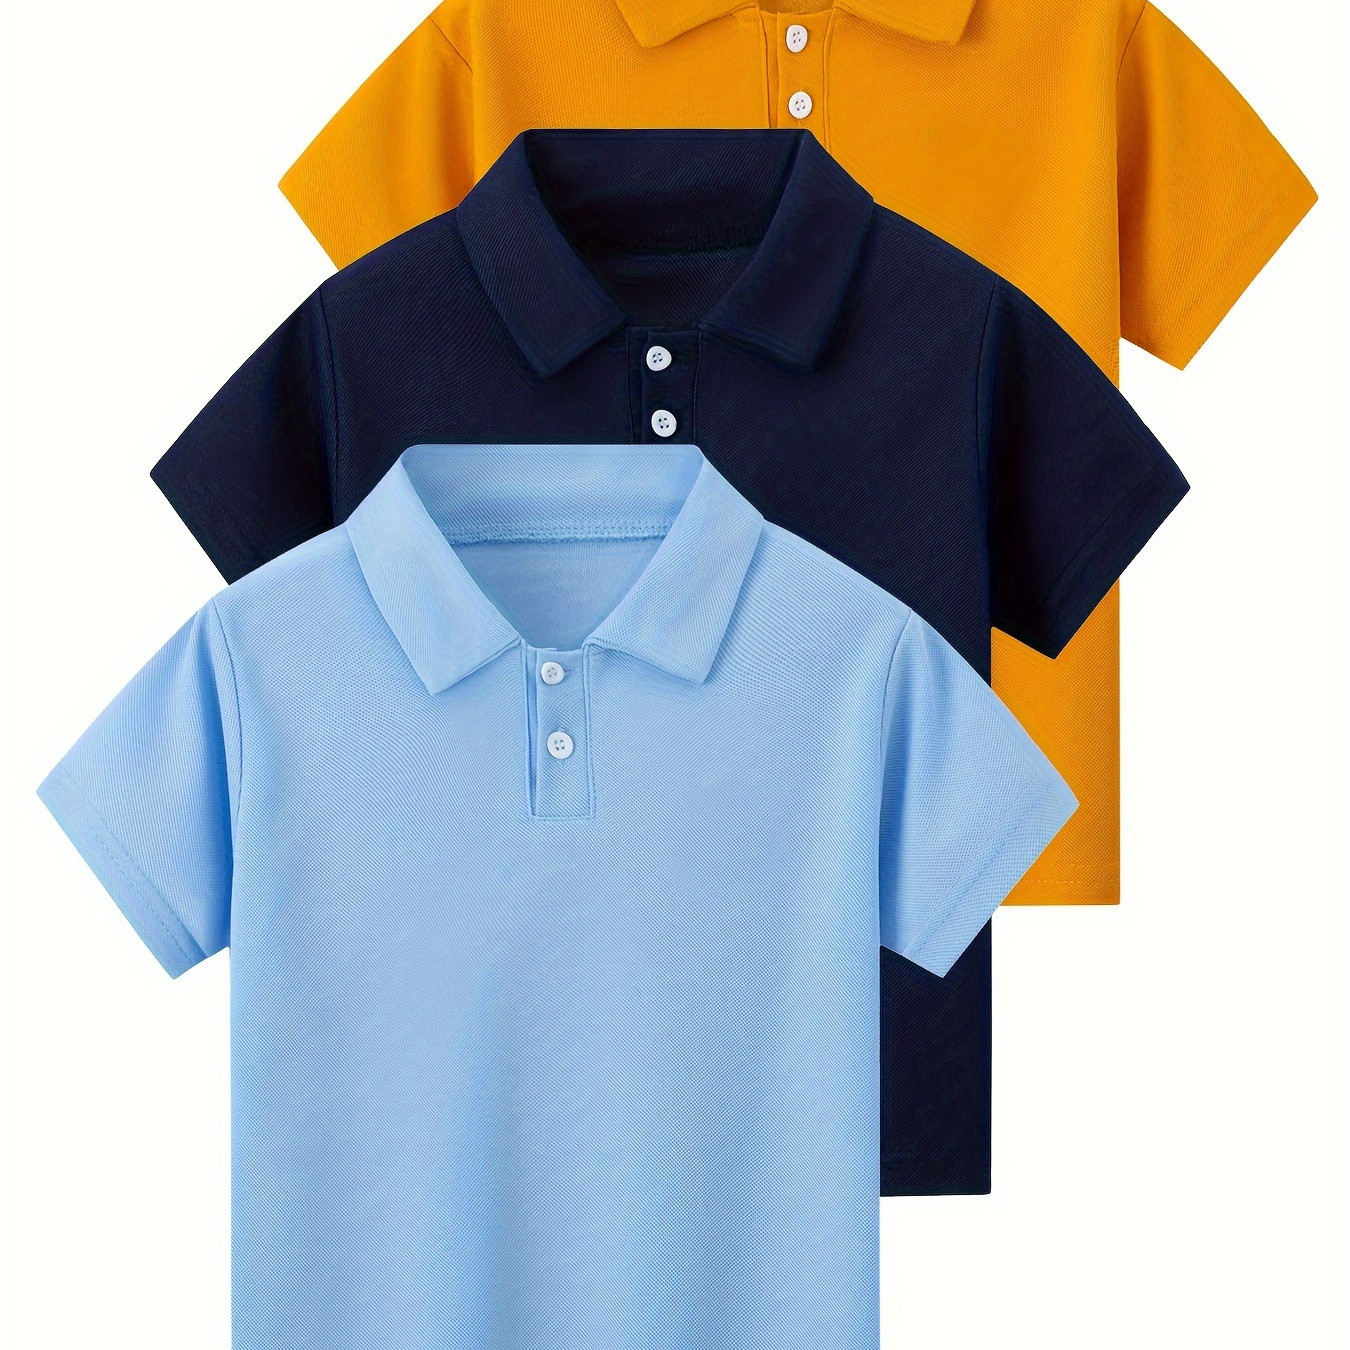 

3-pack Boys Lapel Shirts, Unisex Preppy Style Short Sleeve Top, Summer Casual Wear